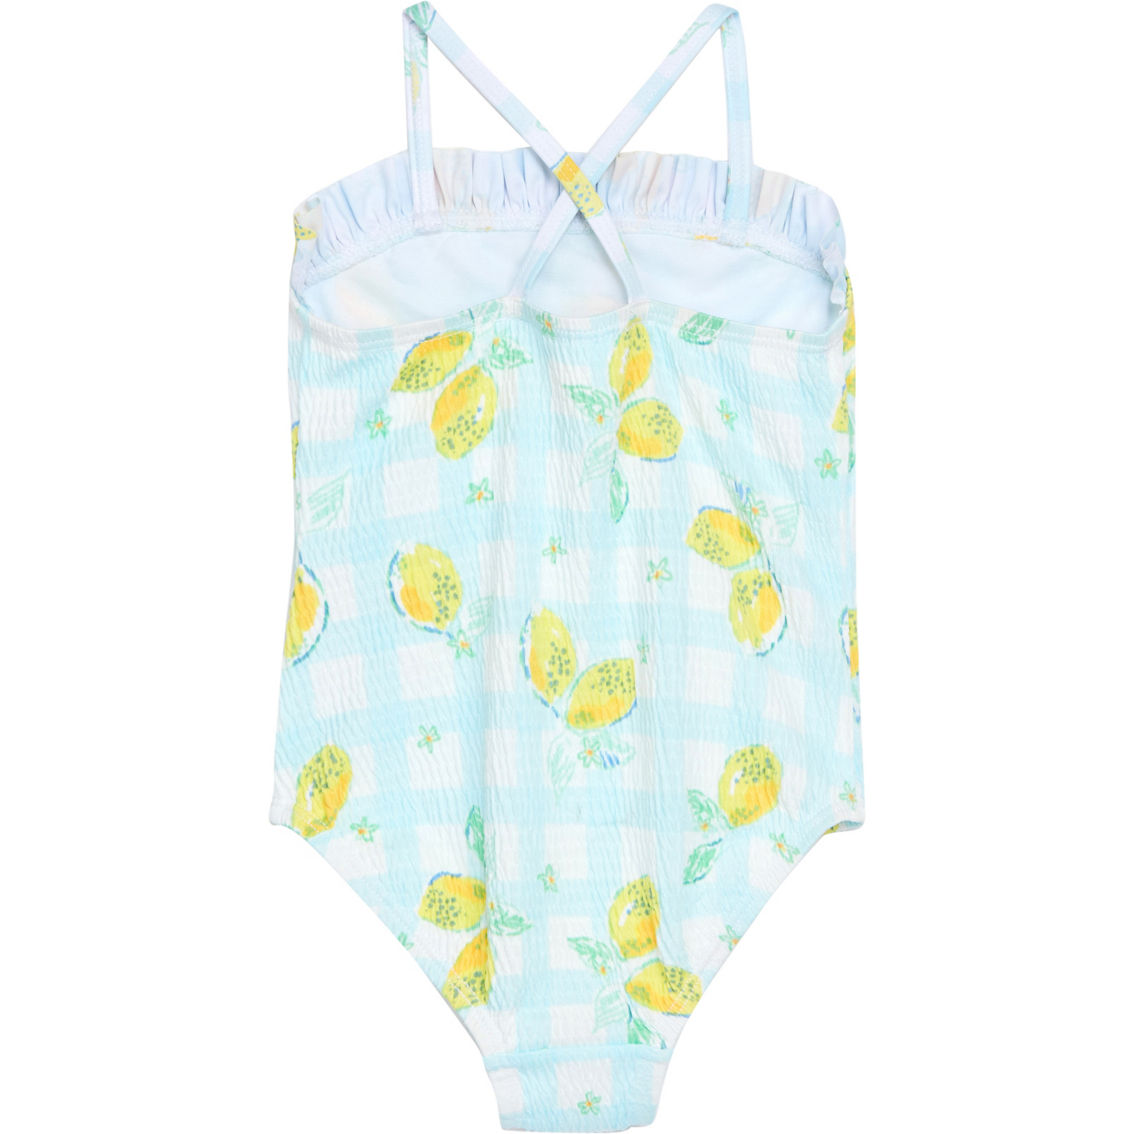 Wippette Toddler Girls Gingham and Lemon 1 pc. Swimsuit - Image 2 of 2